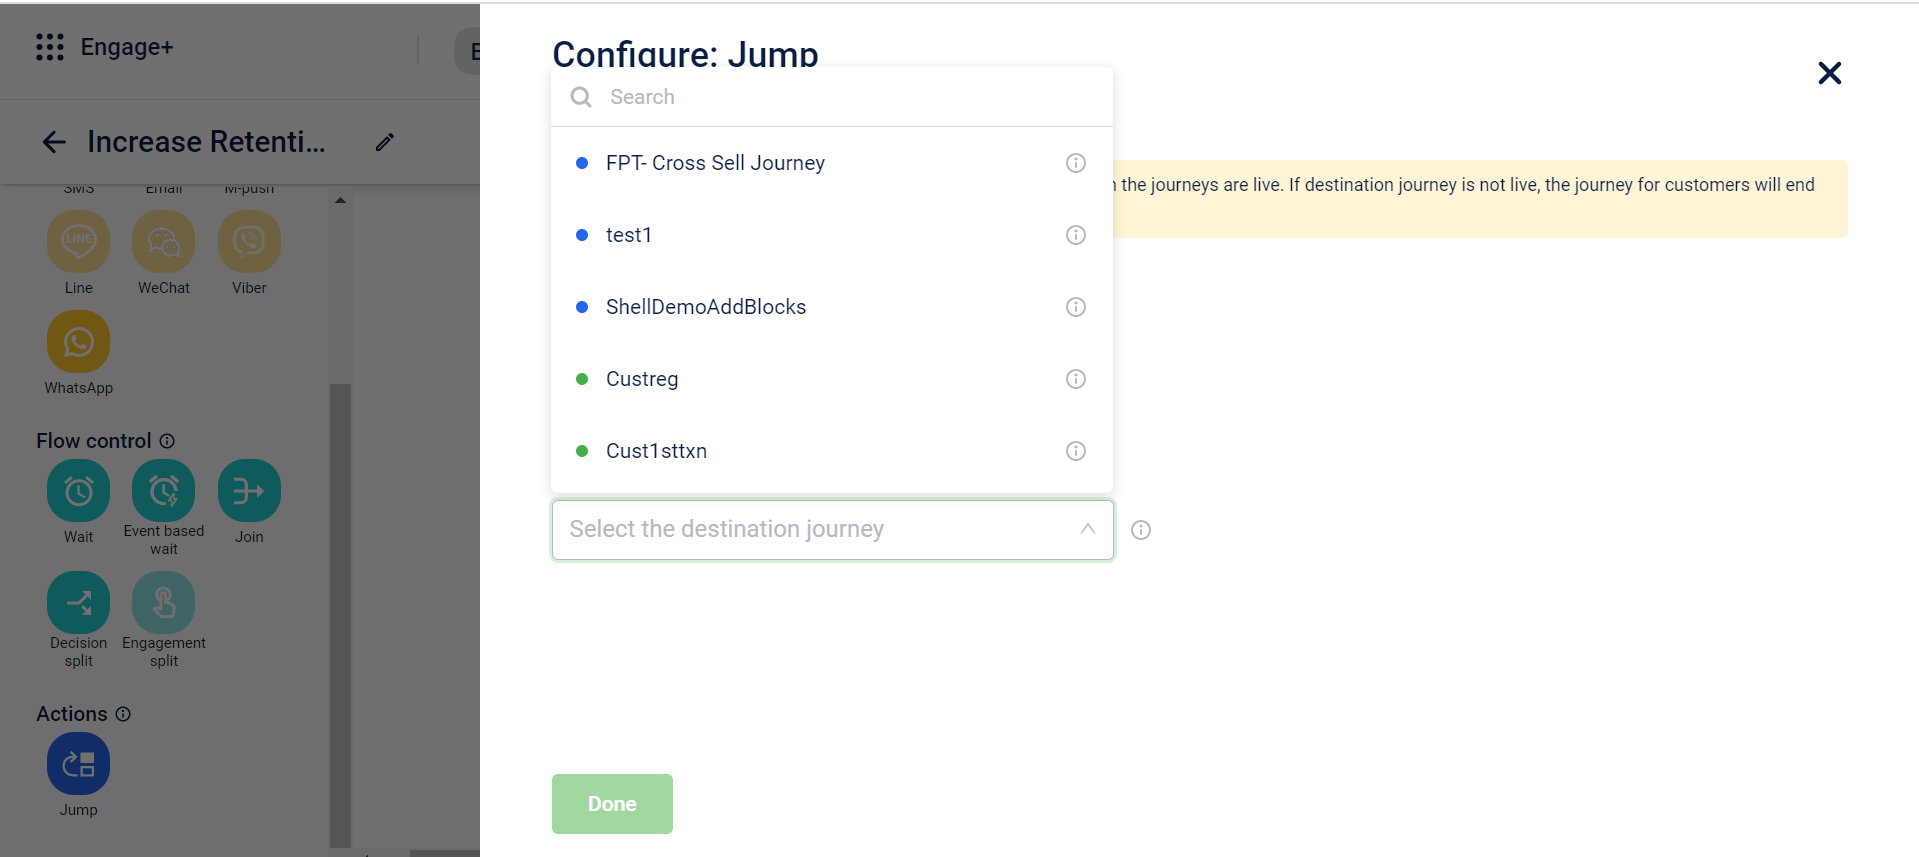 Status, Entry trigger and Duration of the destination journey will be displayed upon selecting the journey. You can click on ‘Go to journey’ to open the destination journey in a new tab.